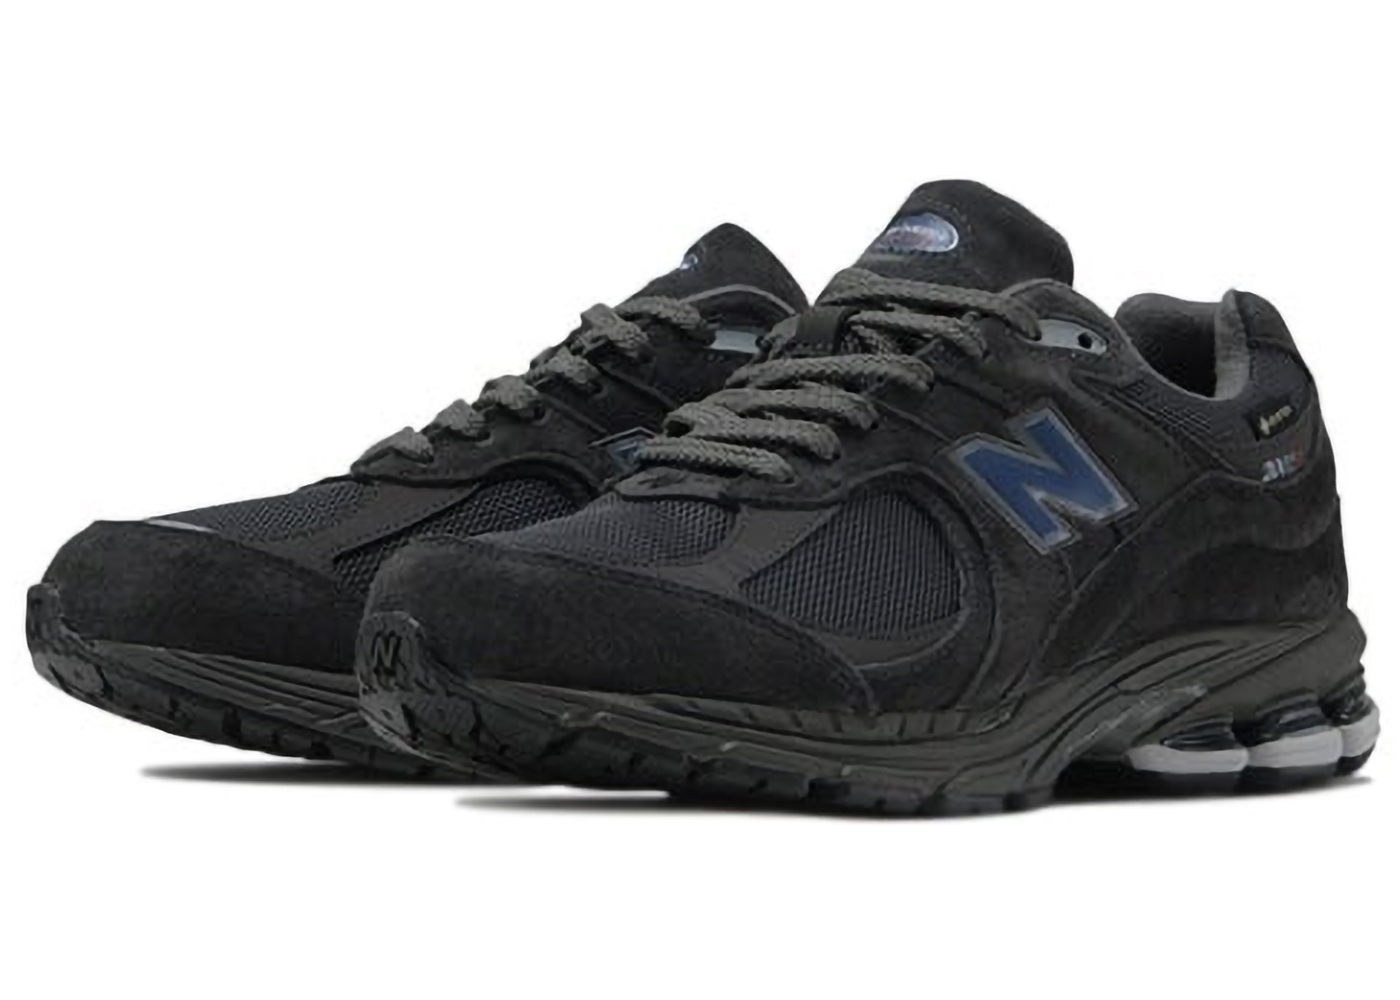 New Balance 2002R Gore-Tex Charcoal Beams Exclusive Men's Trainers